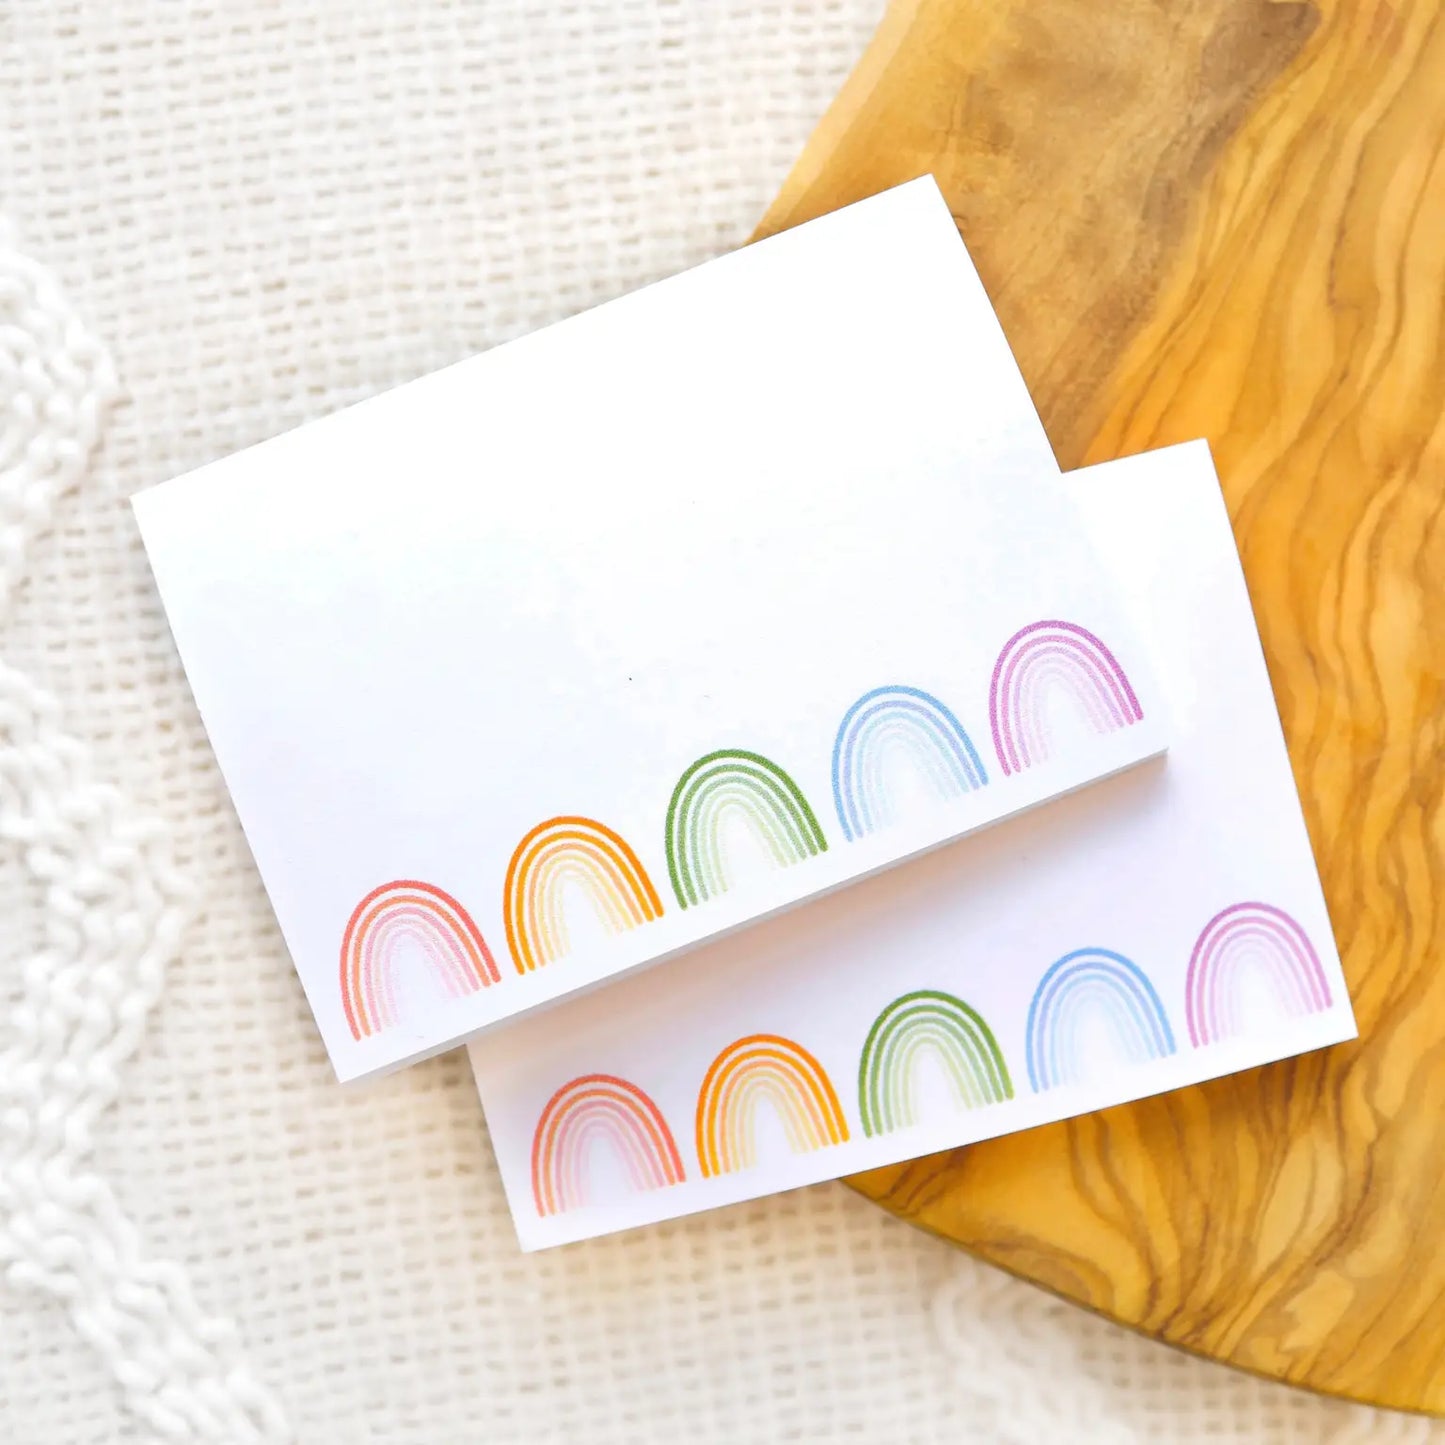 Pads of white sticky note paper with red, orange, green, blue, and purple rainbows on the bottom edge